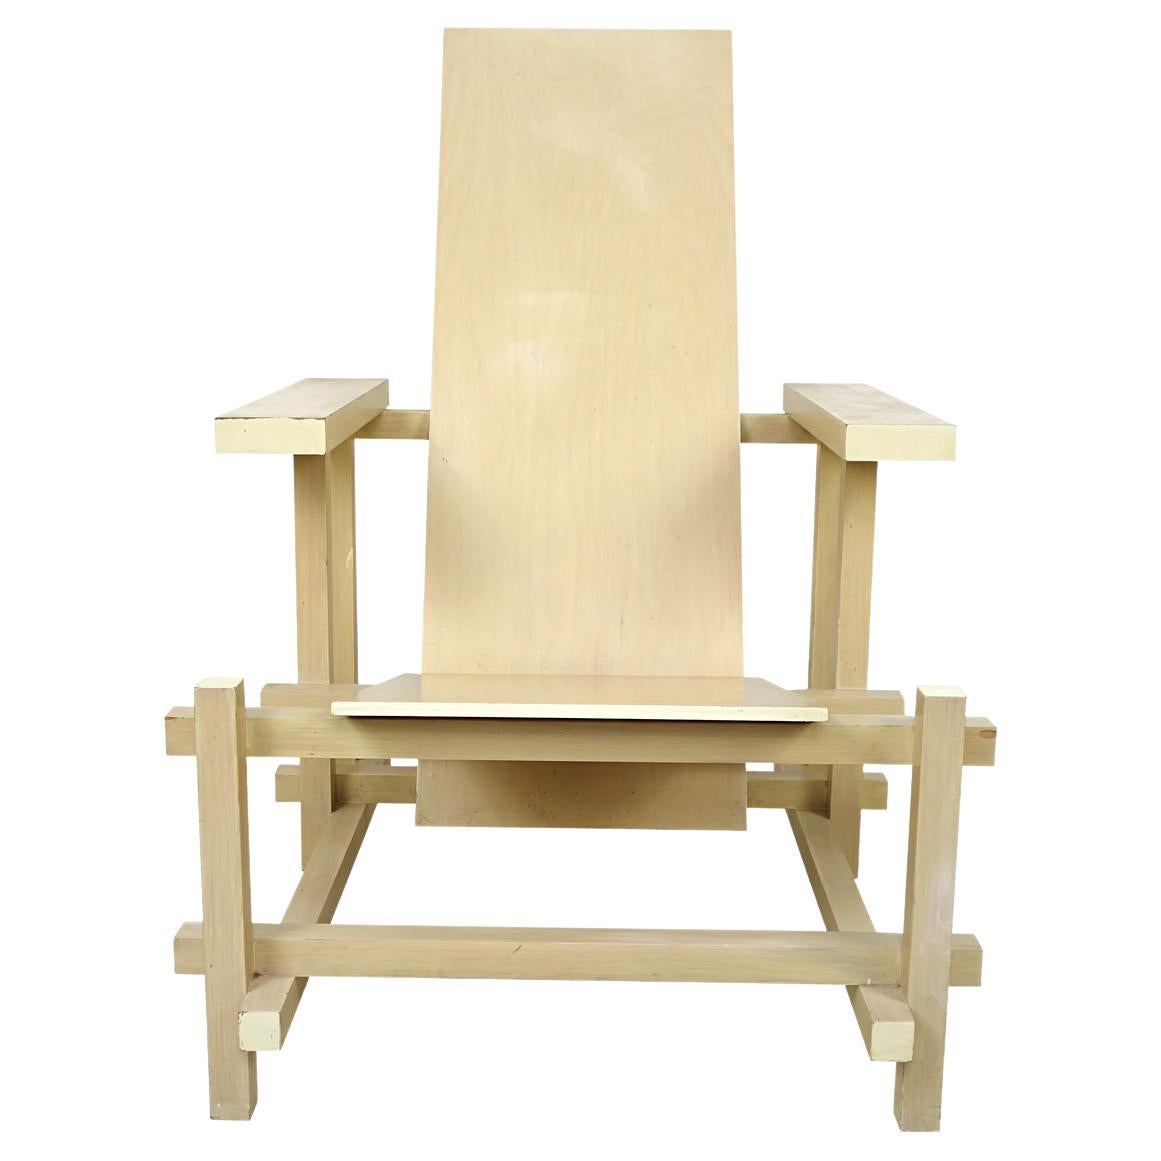 Modernist Chair Made of Uncolored Lacquered Wood after Gerrit Rietveld's Design